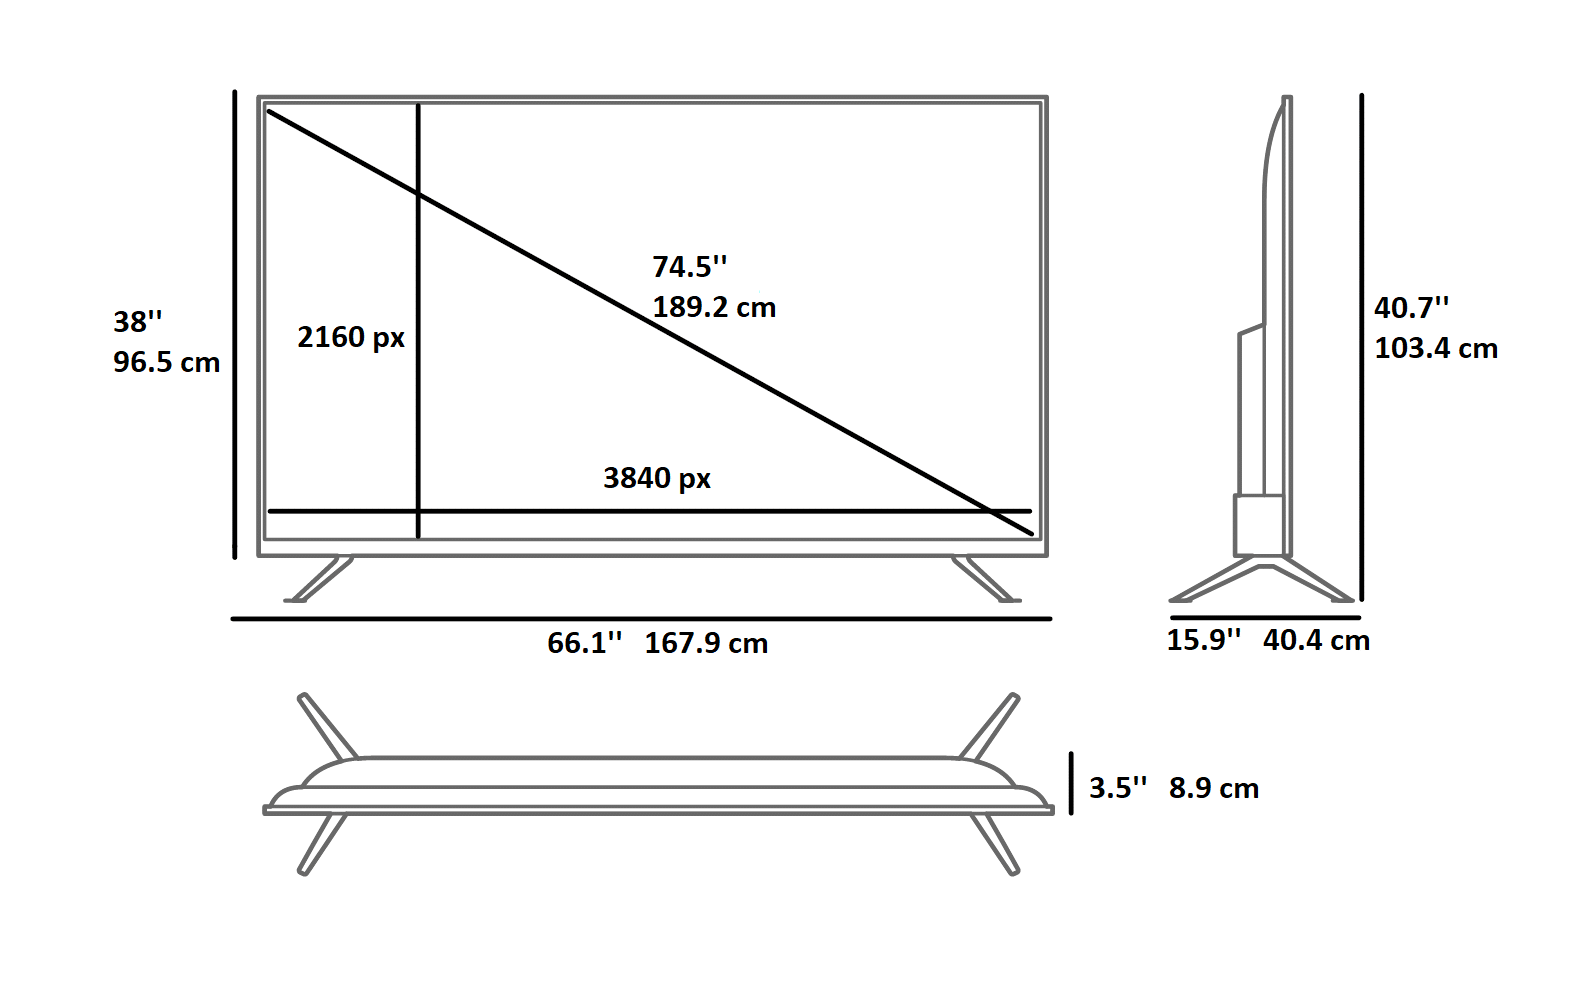 Dimensions of a 75-Inch TV